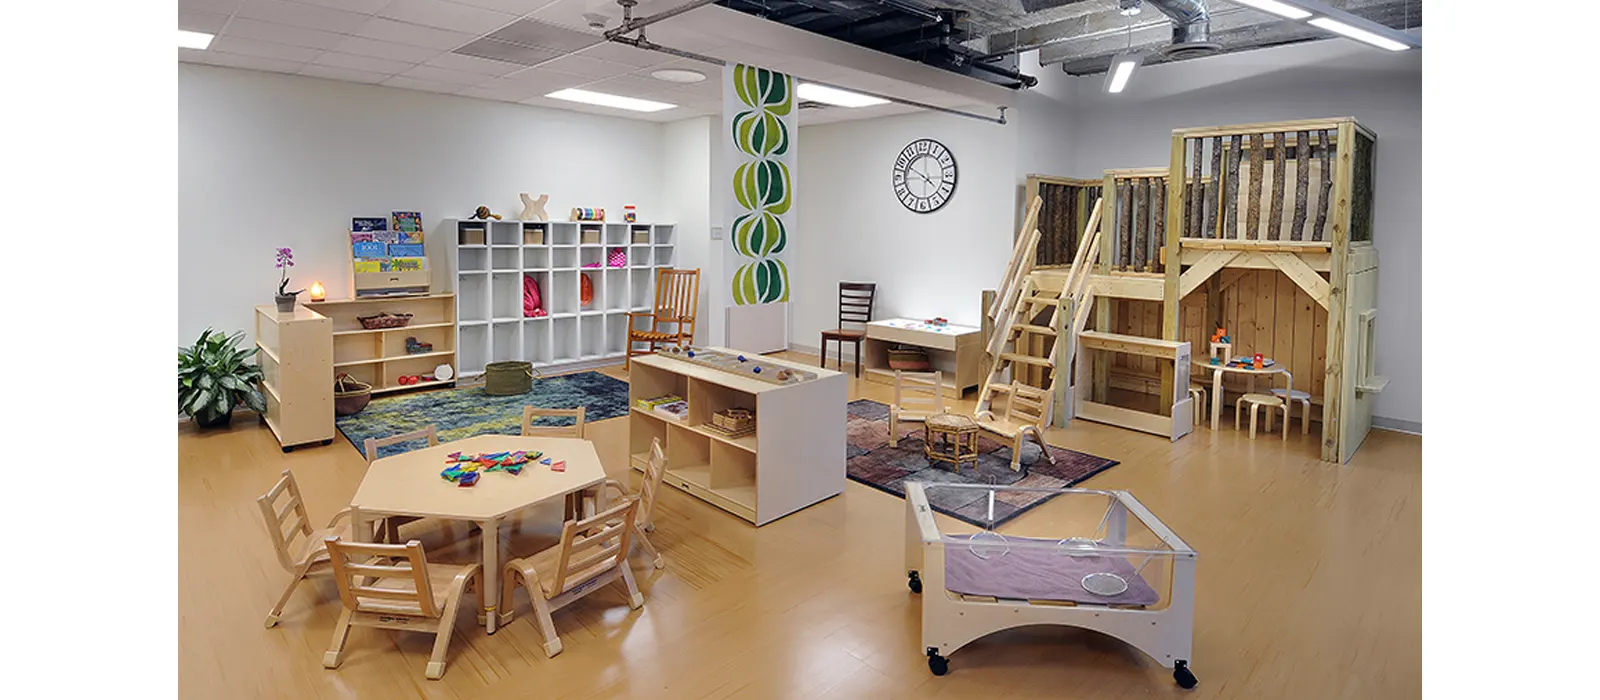 The Impact of Furniture on Learning Environment in Preschool